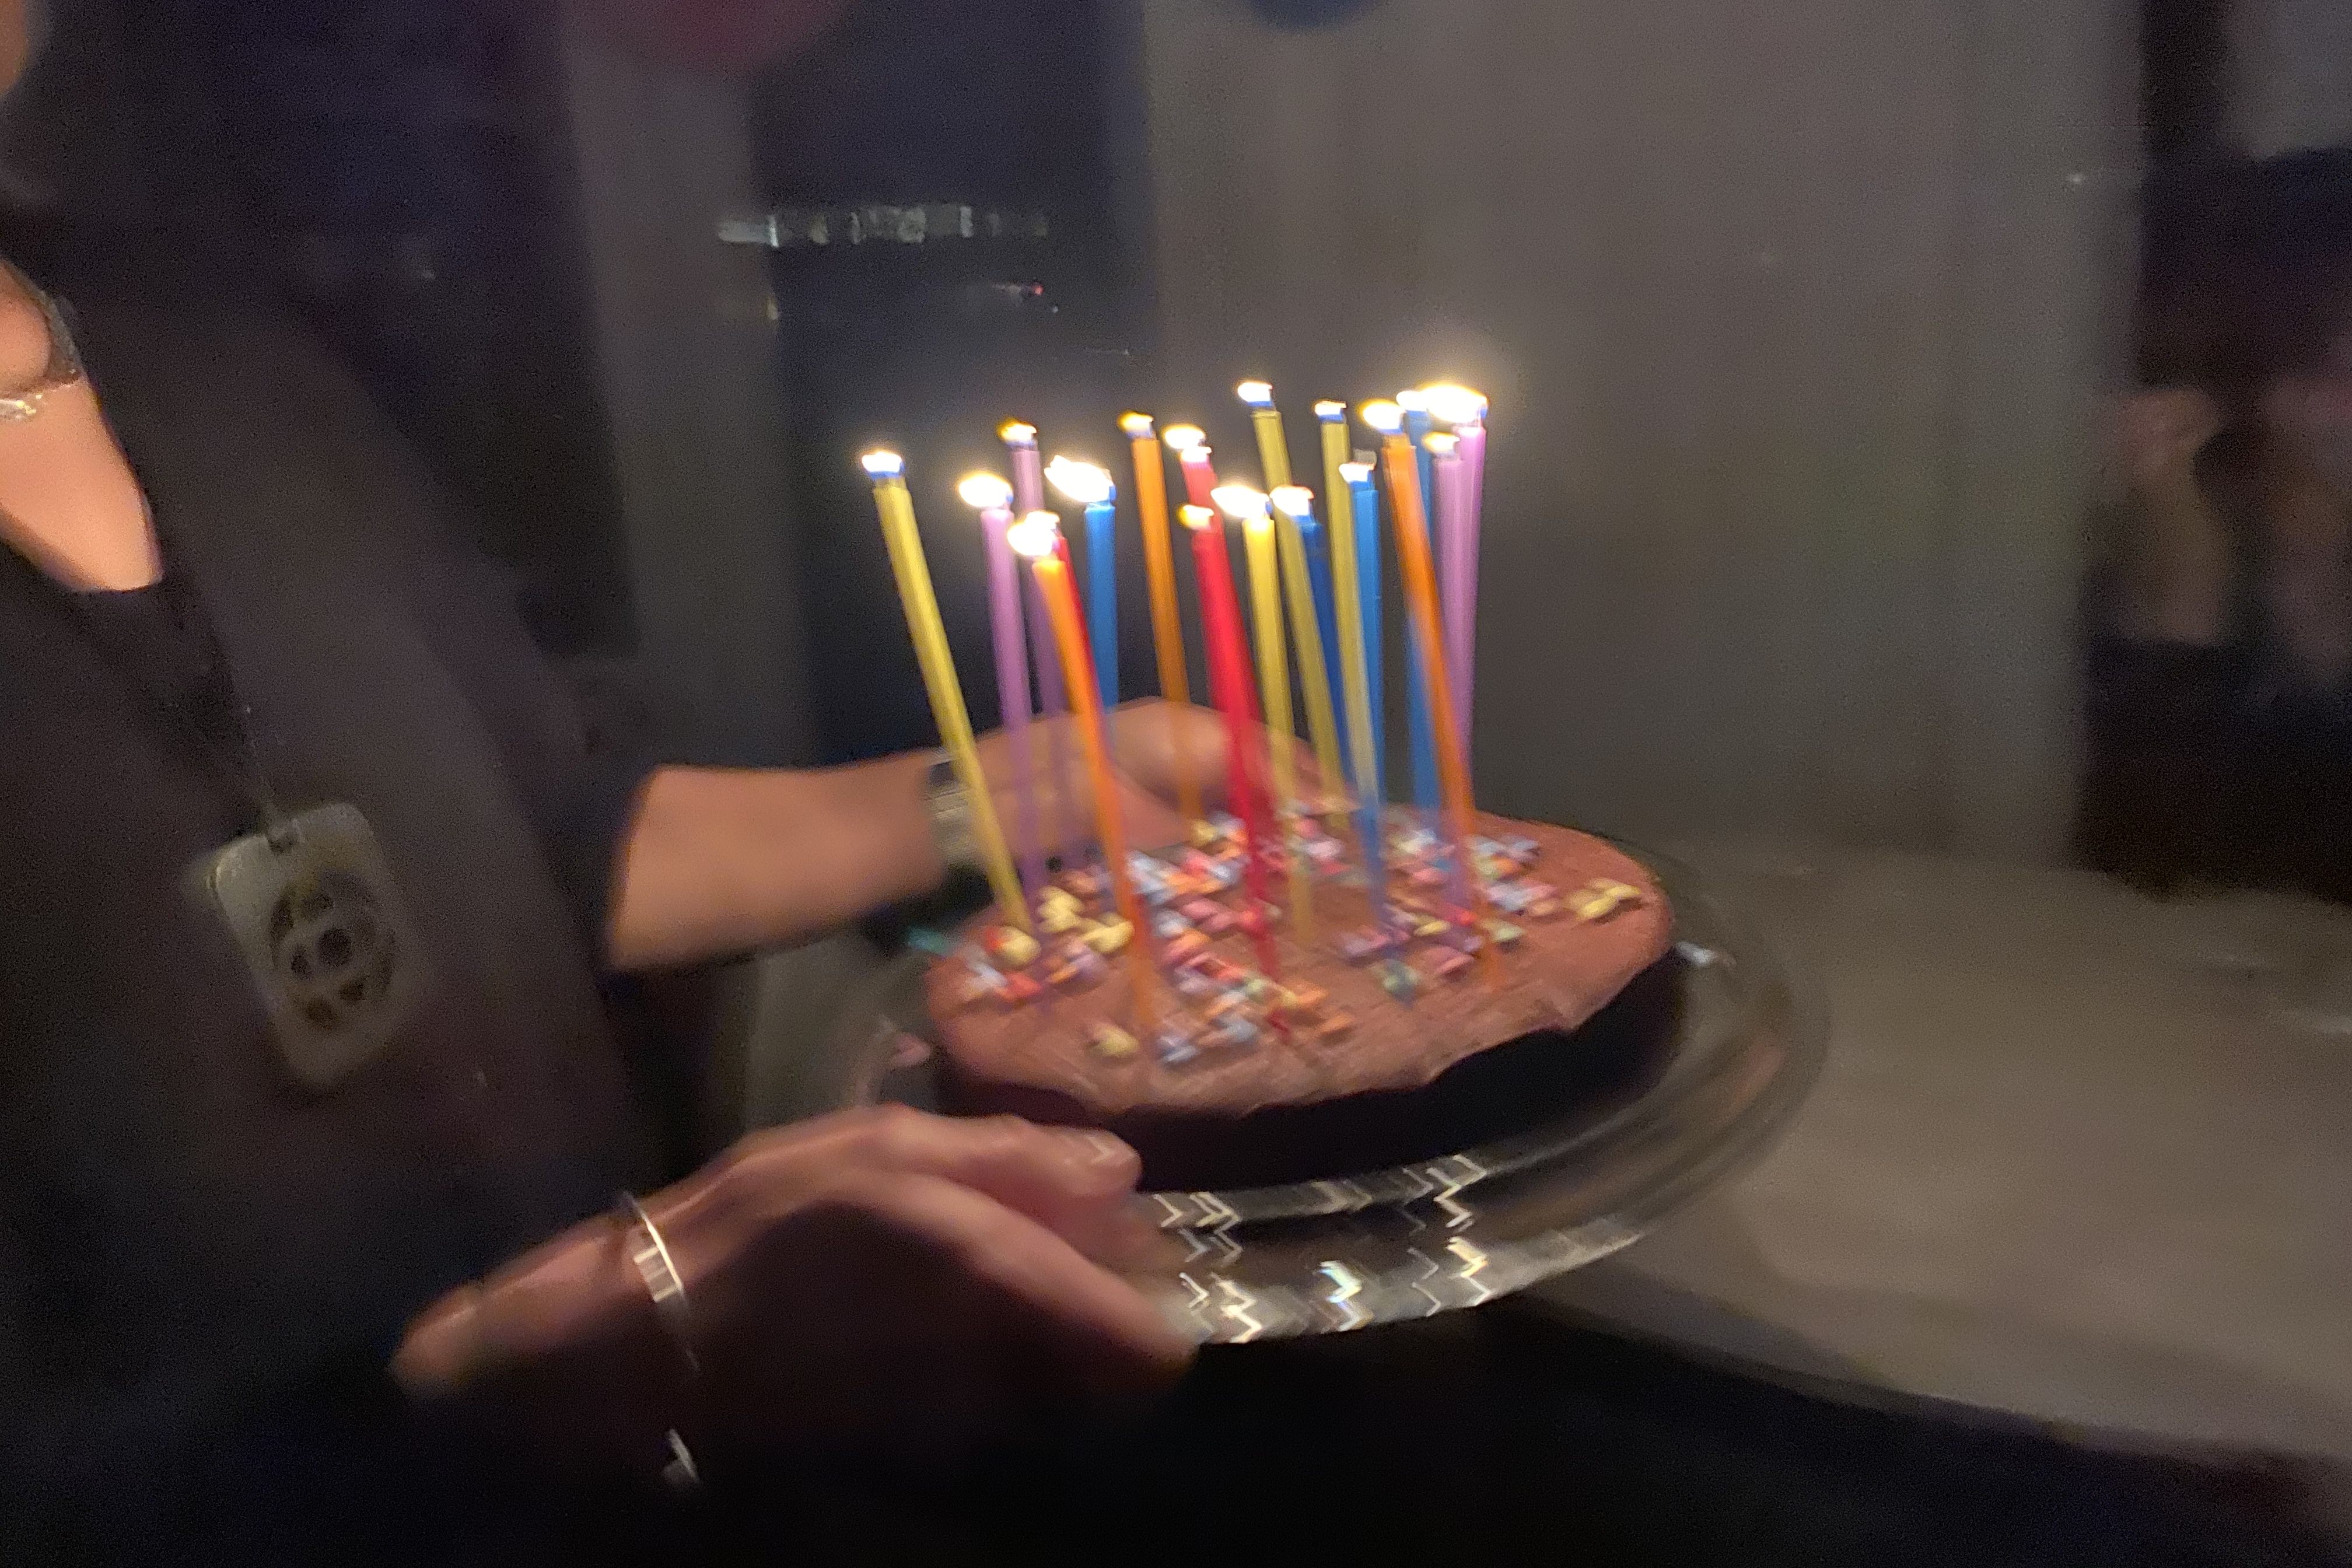 Chocolate cake with candles and smarties